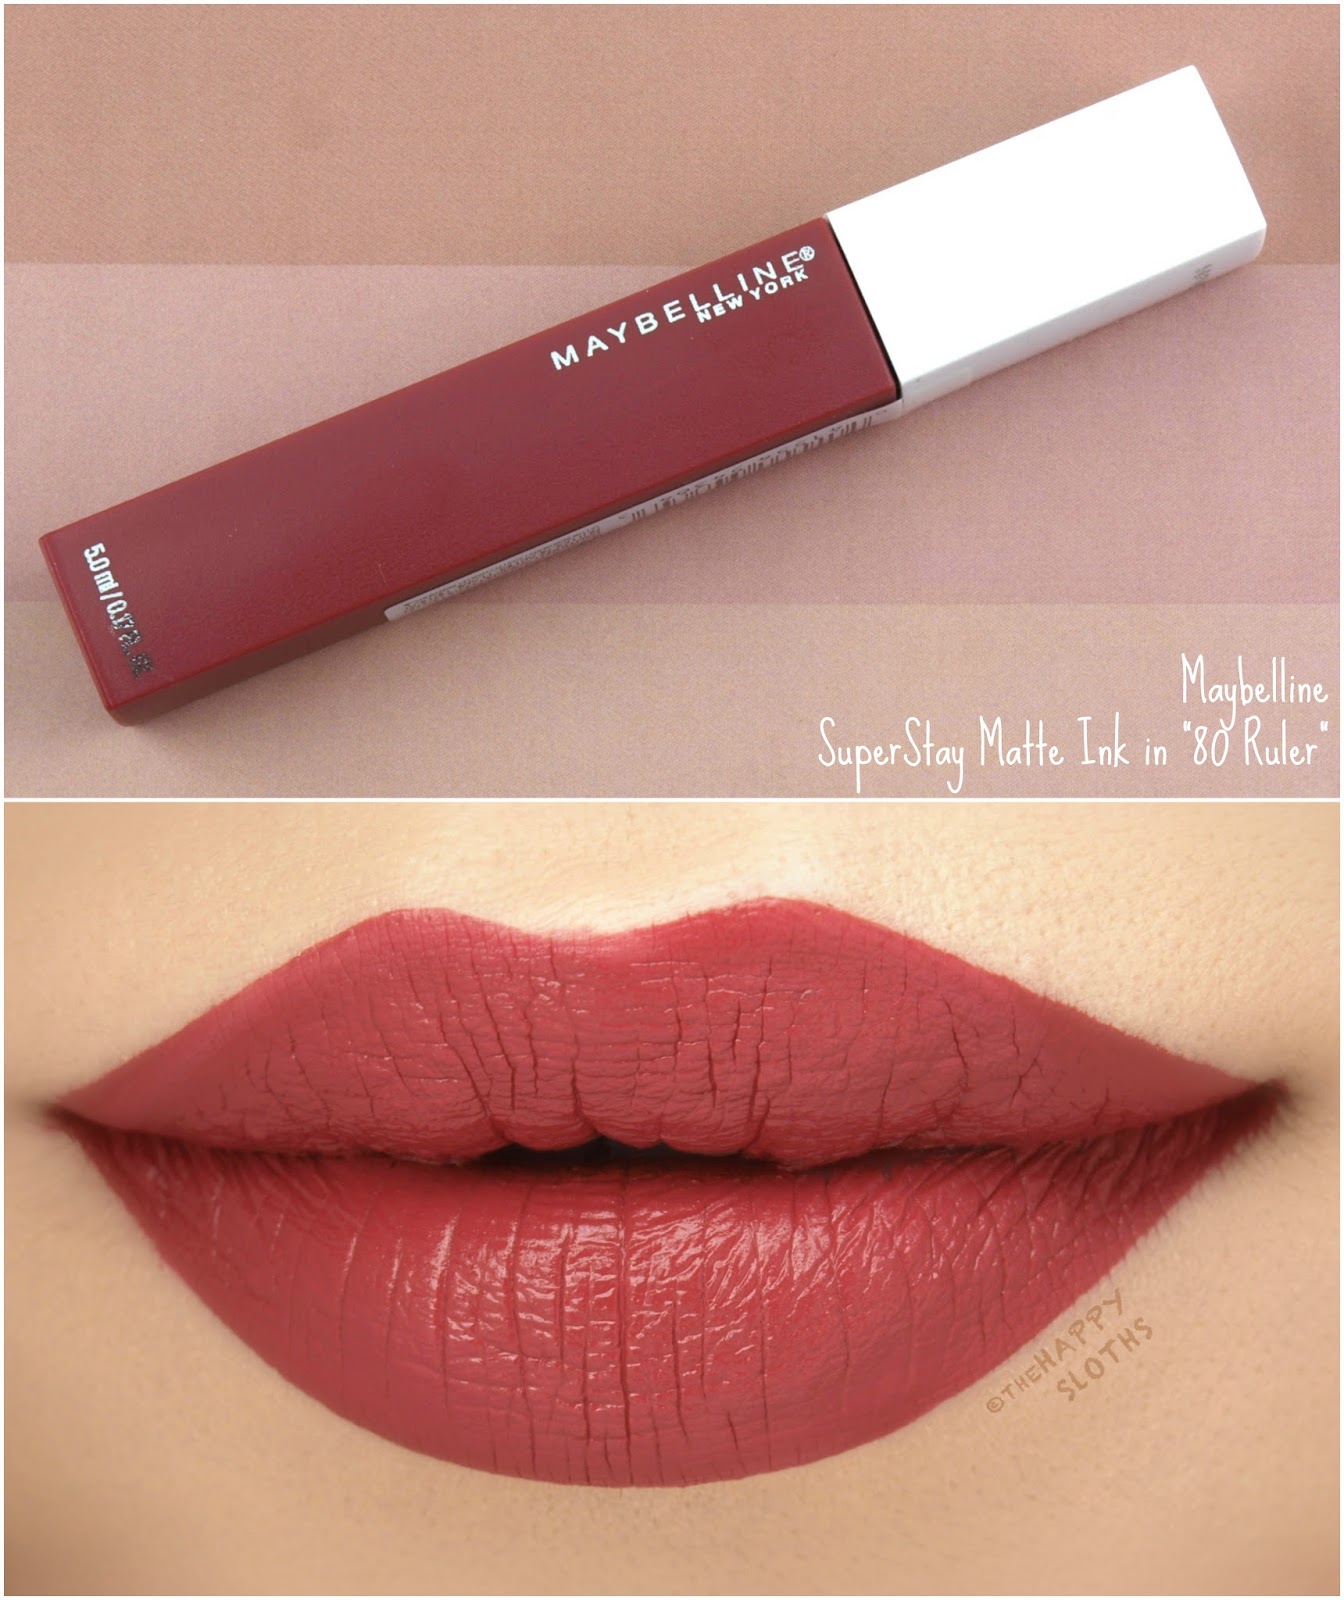 Maybelline | SuperStay Matte Ink "80 Ruler": Review and Swatches